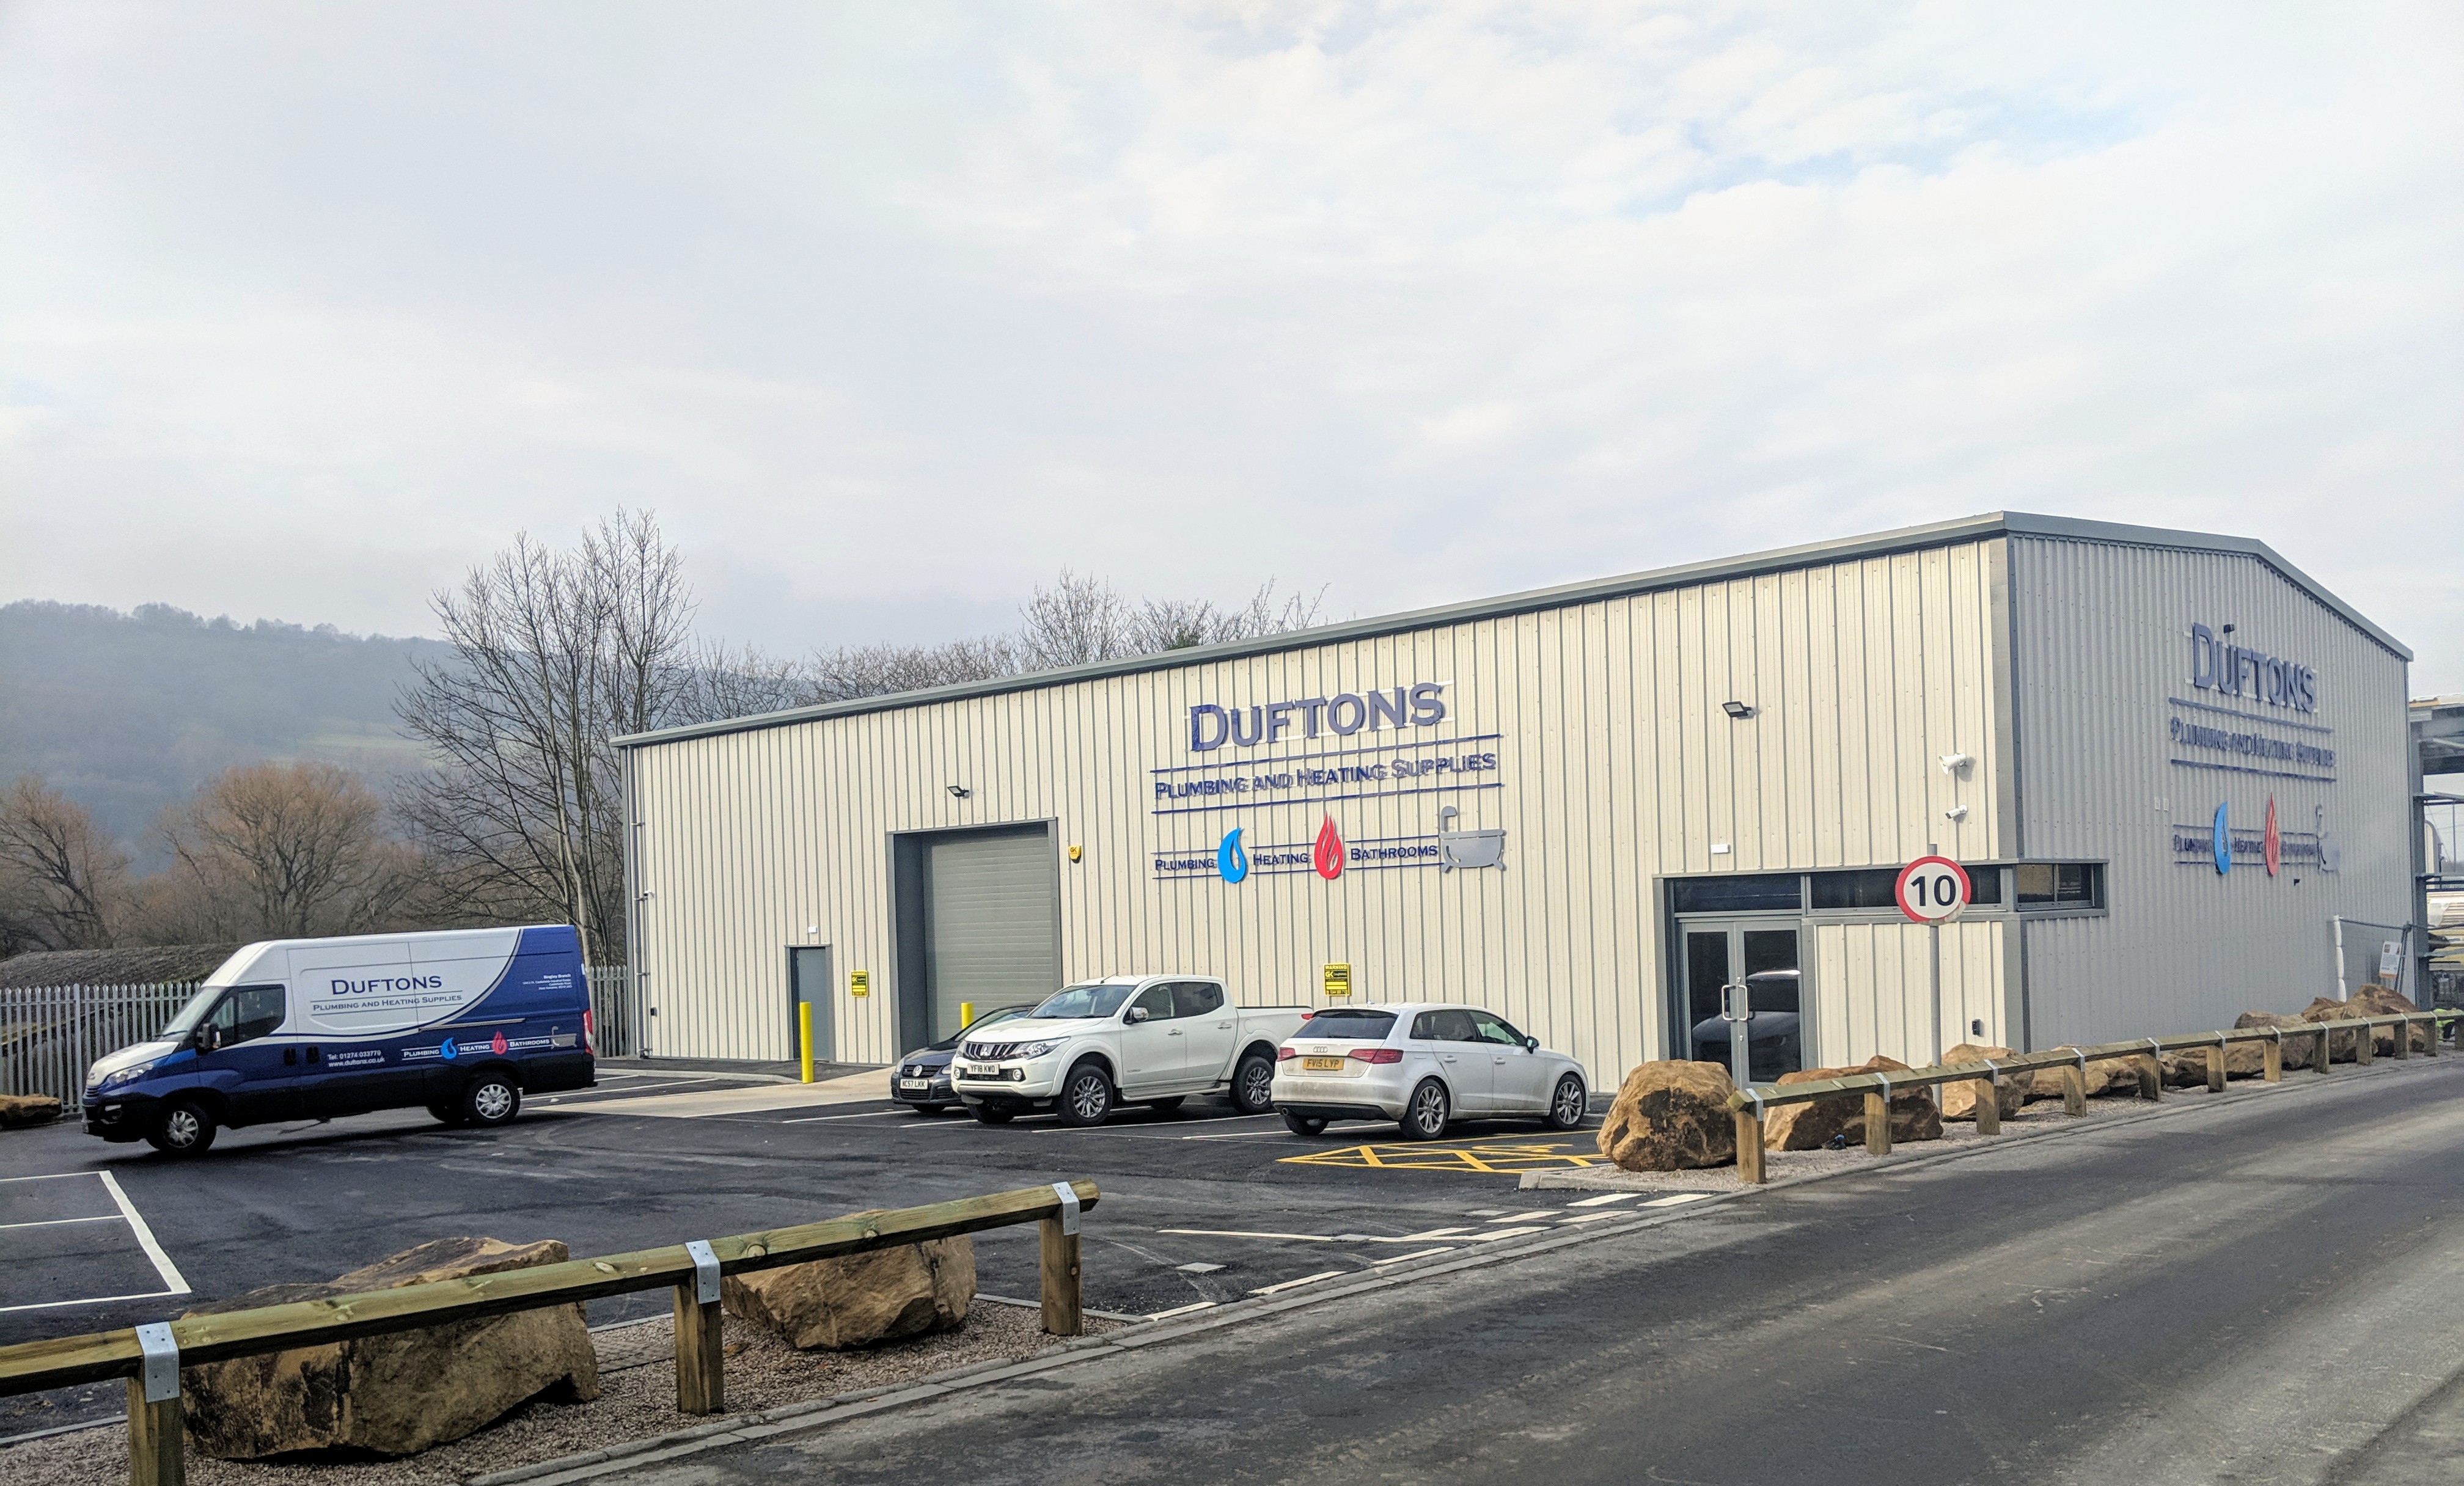 Duftons Plumbers Merchants move to Castlefields Trade Park